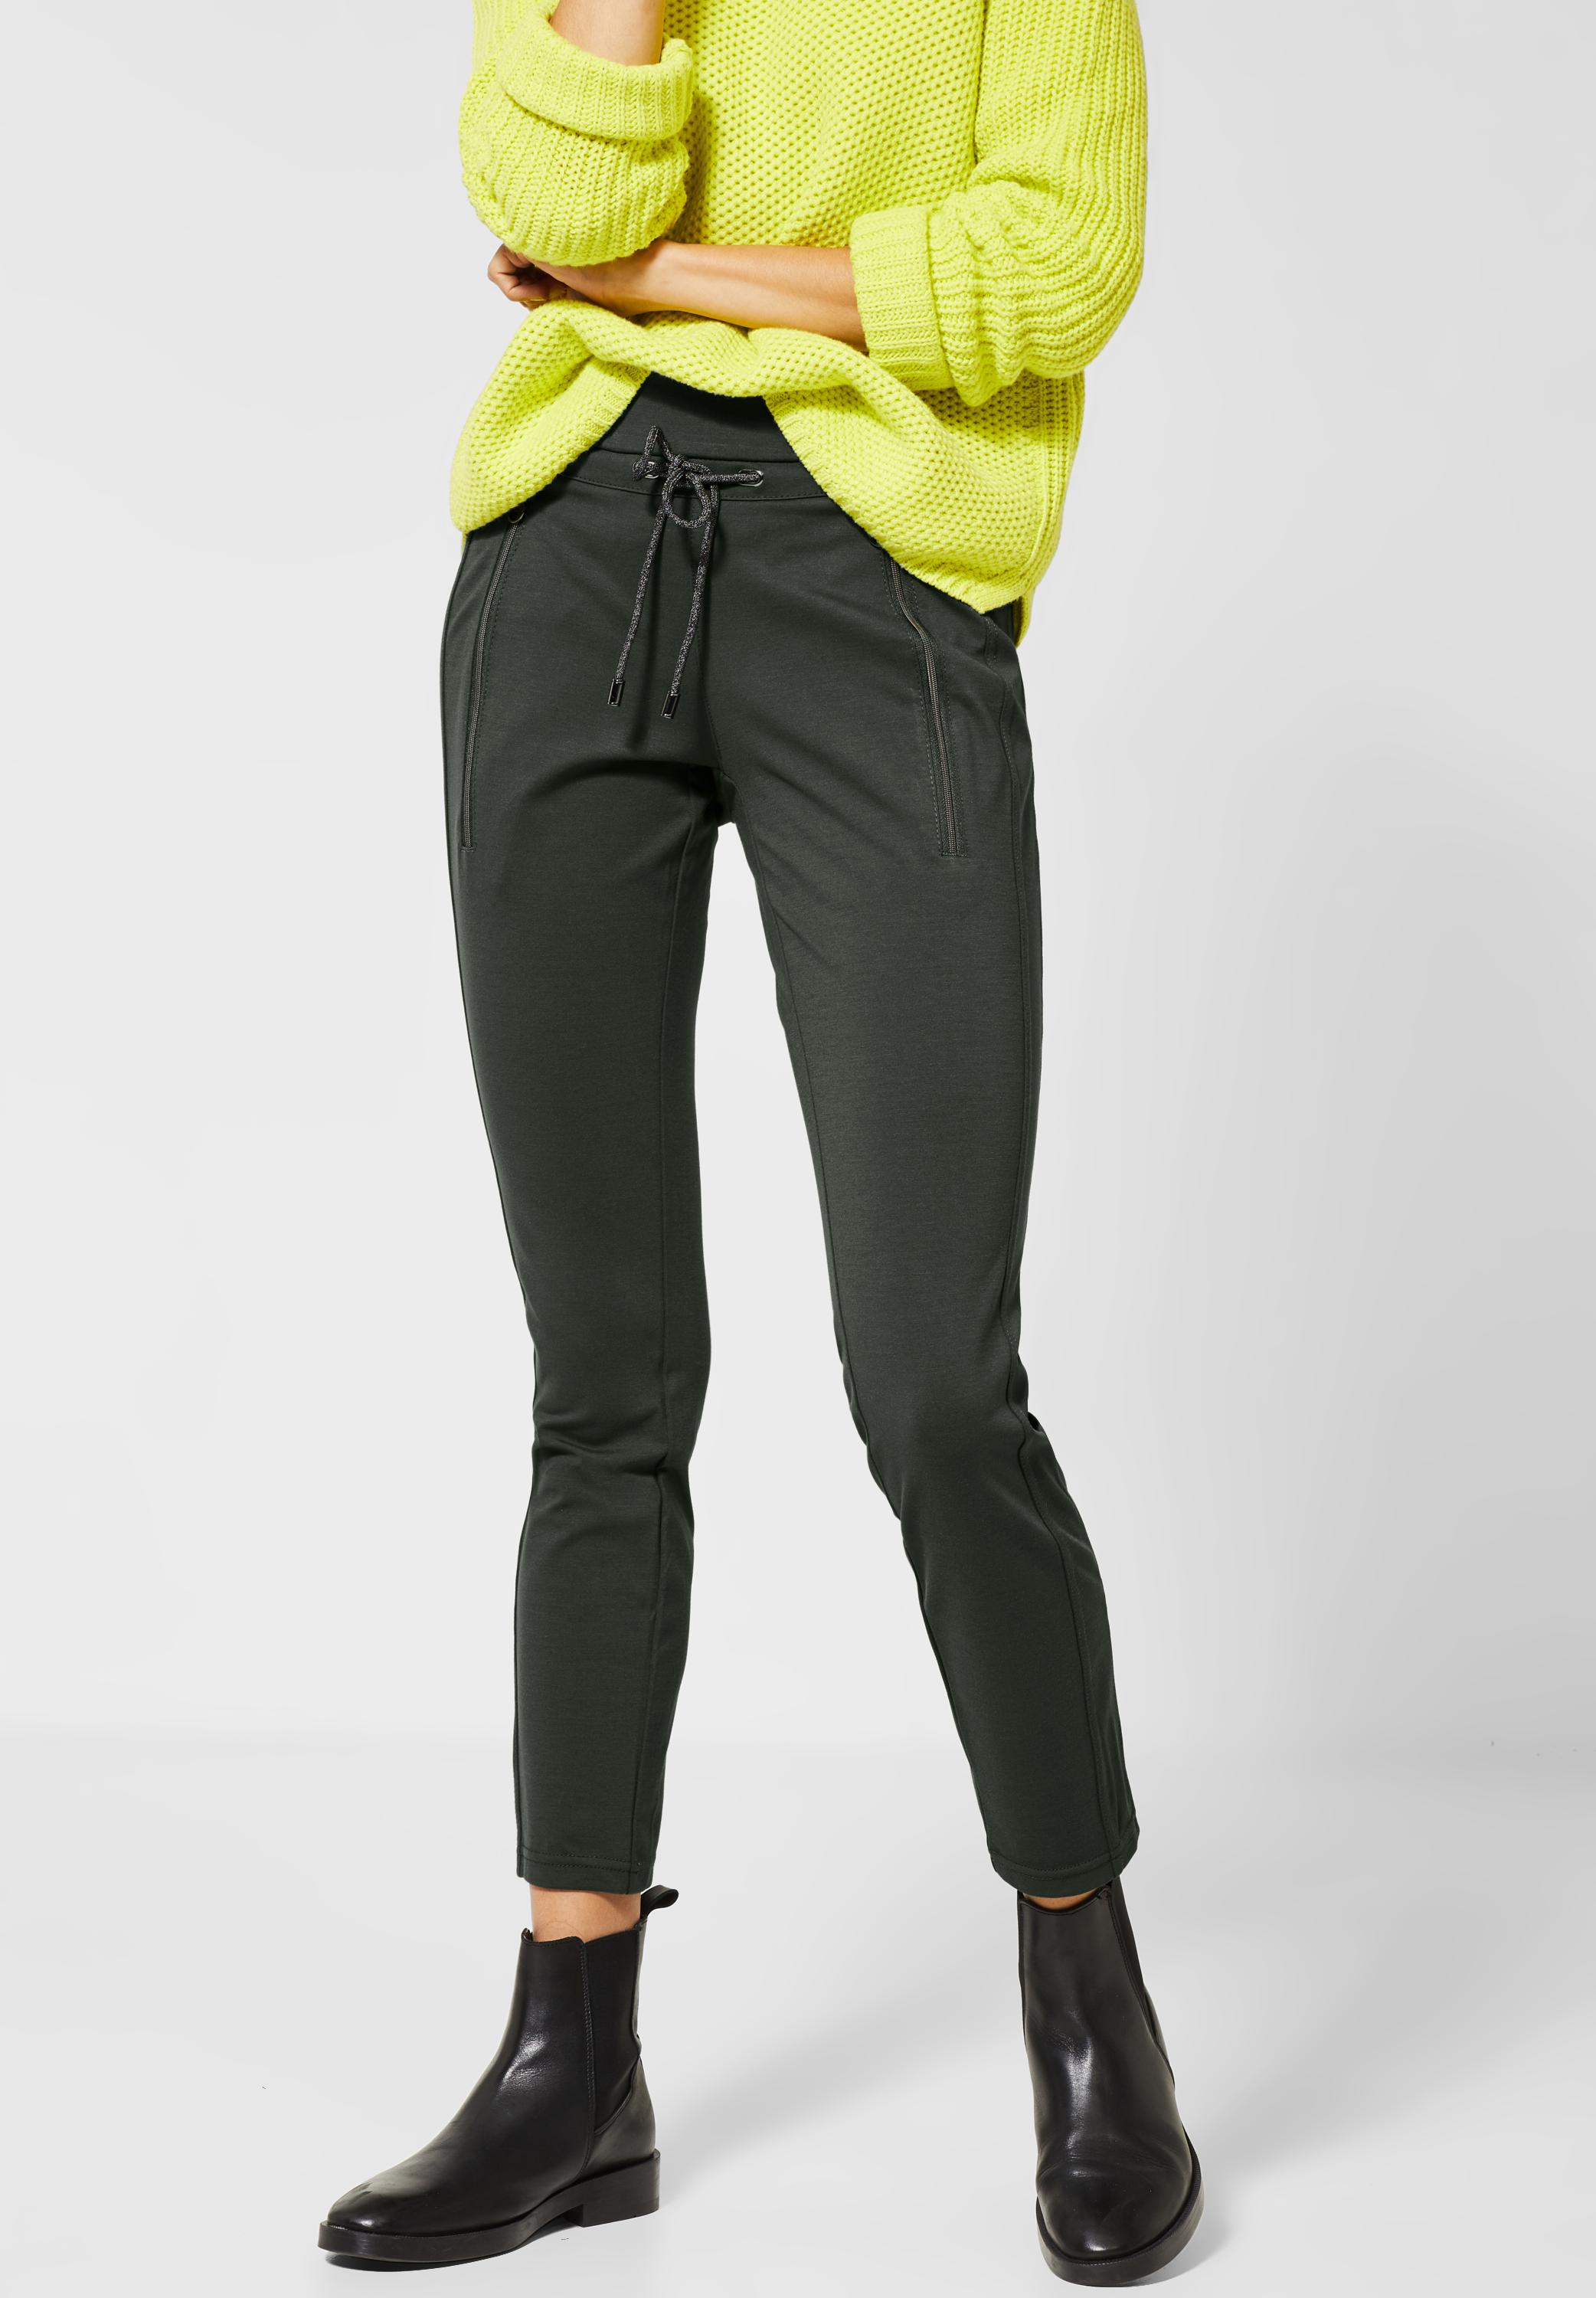 Moss Street - A372747-12047 in Mode Bonny One Joggpant CONCEPT Green